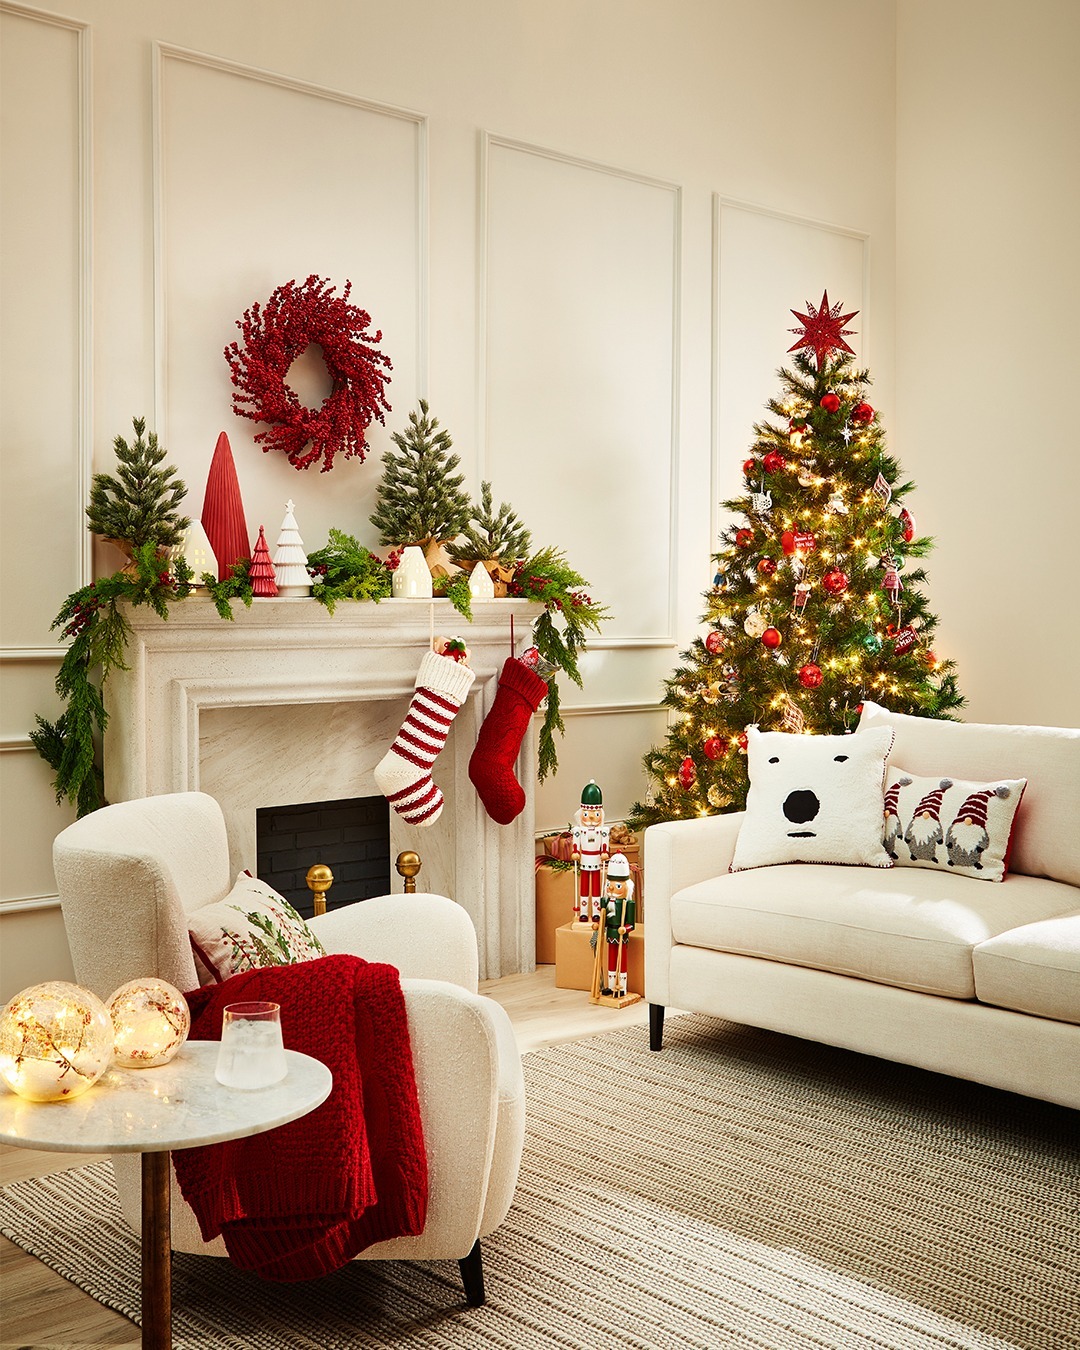 living room with holiday decor including a Christmas tree, pillows, throws, and stockings hanging on a mantle